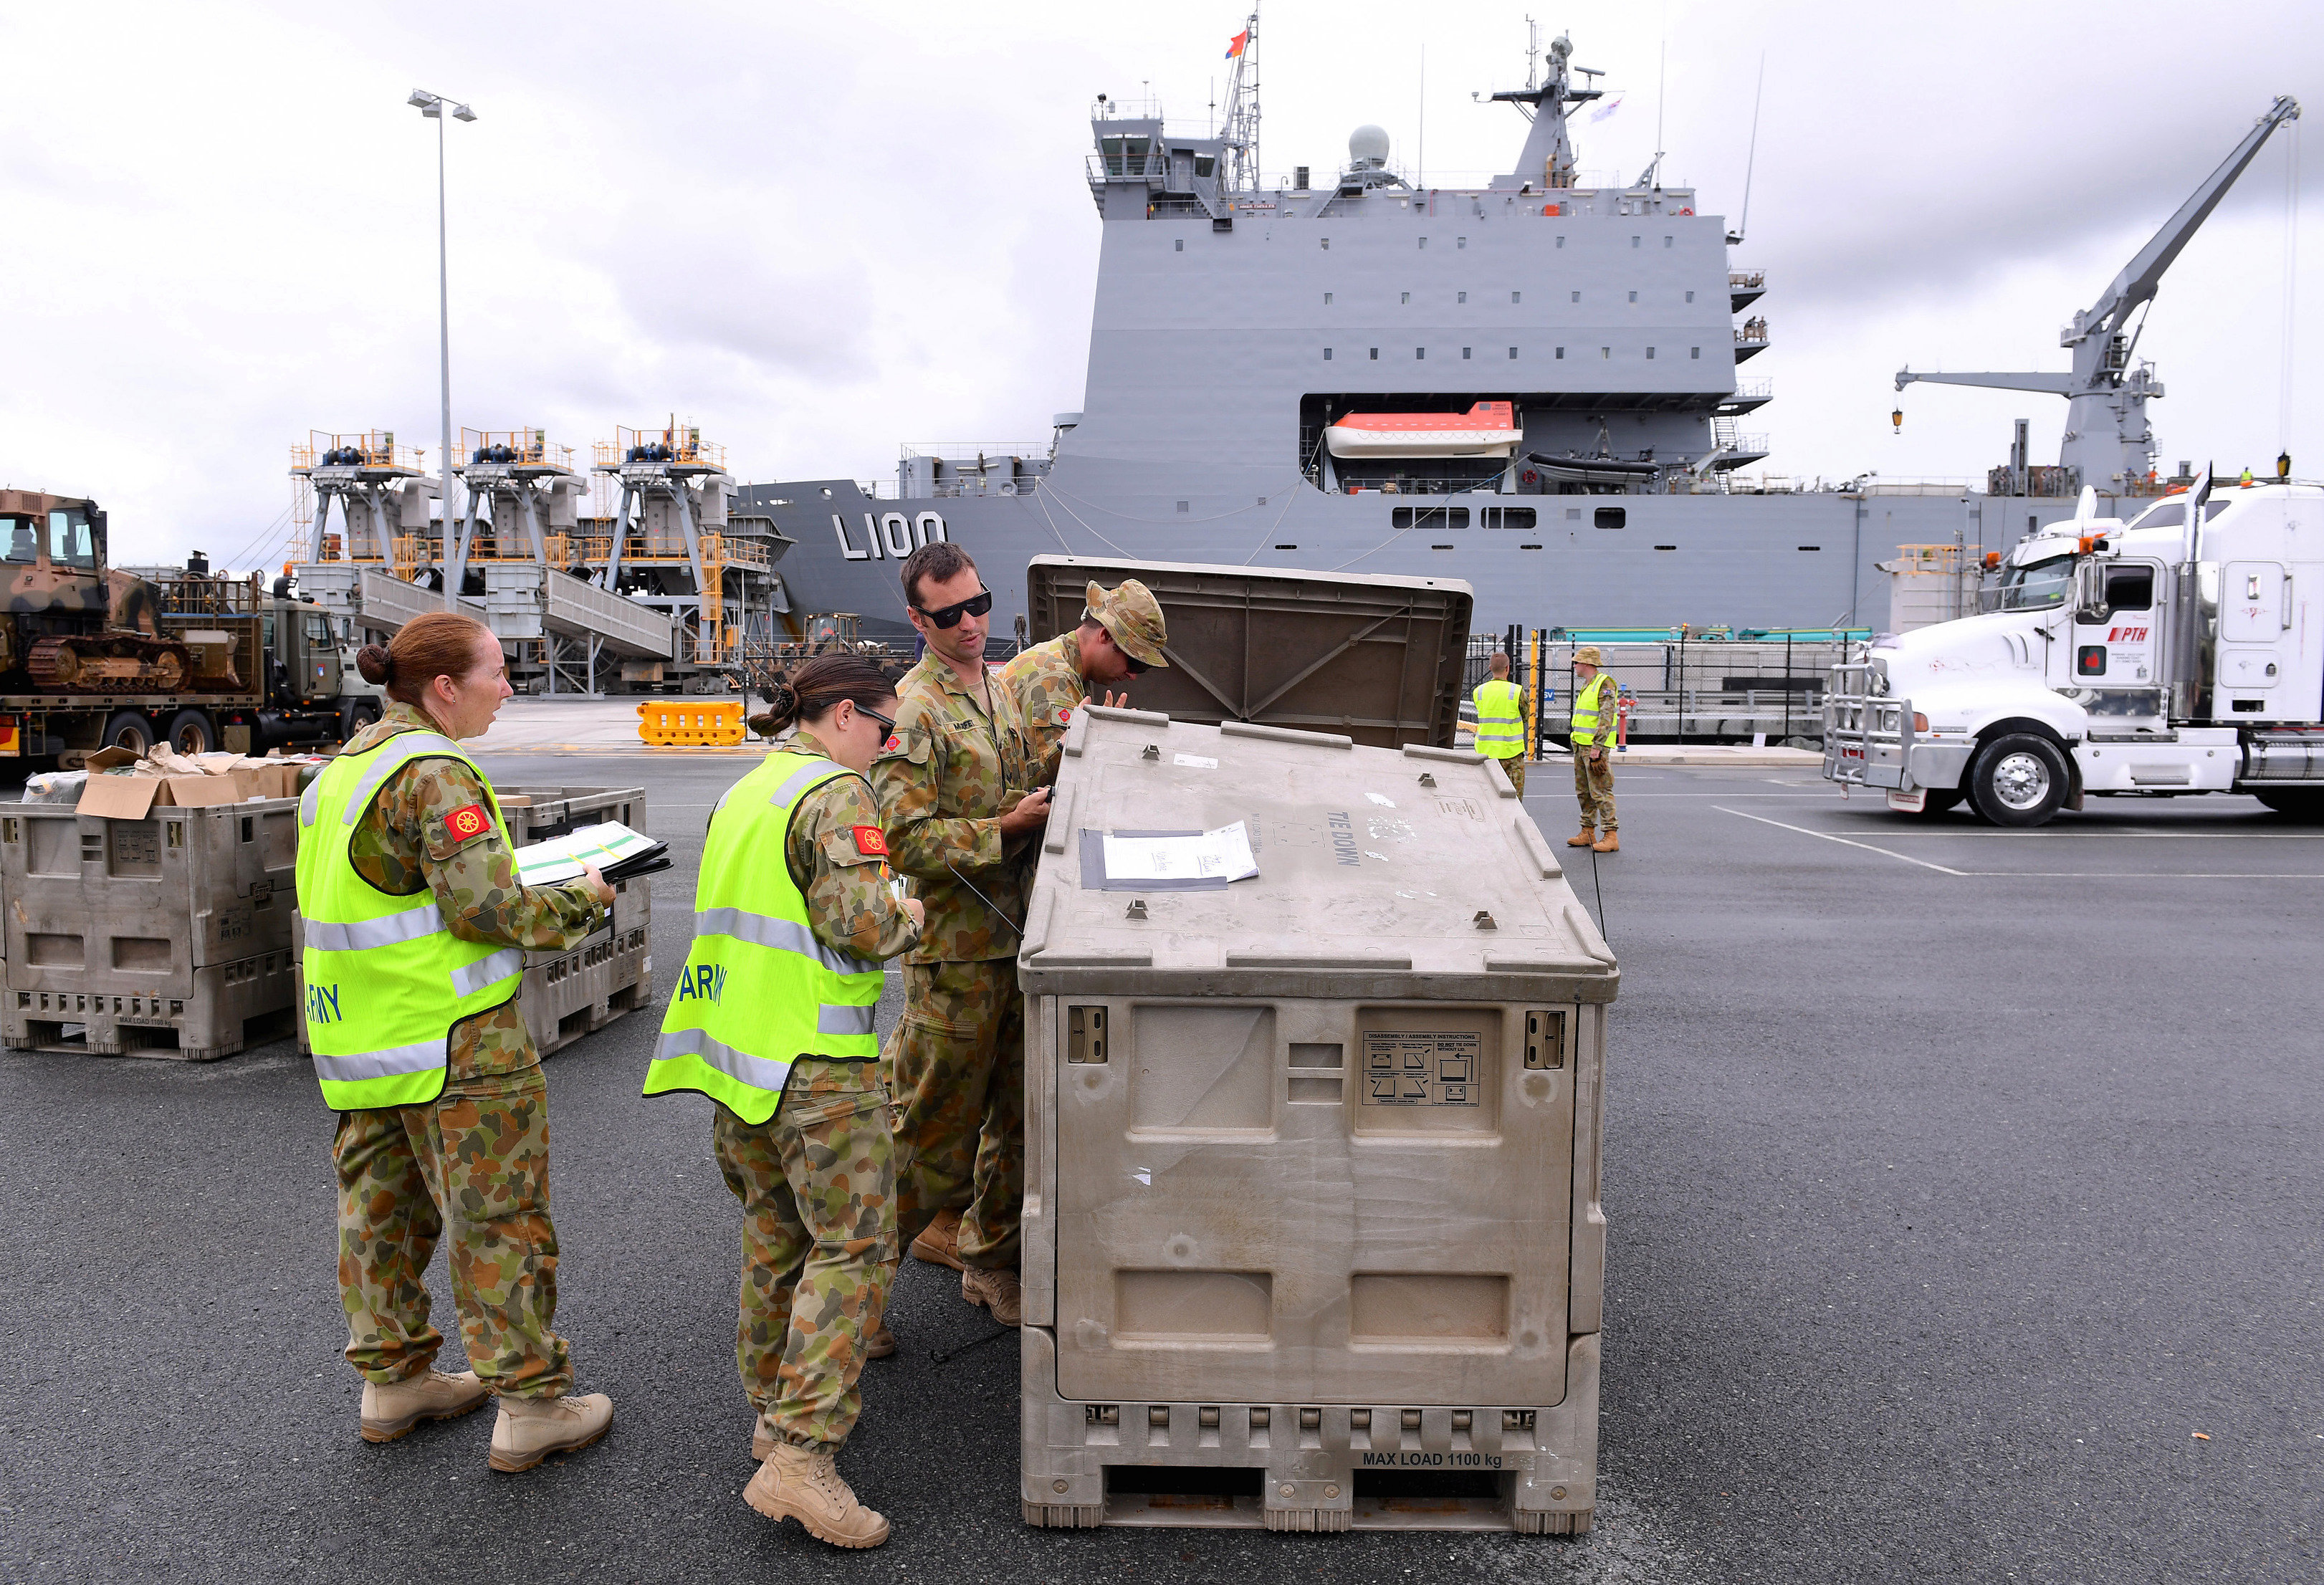 Emergency relief supplies for those affected by Cyclone Debbie are loaded onto the Royal Australian Navy Ship HMAS Choules at the Port of Brisbane in Australia, March 29, 2017.   AAP/Dave Hunt/via REUTERS